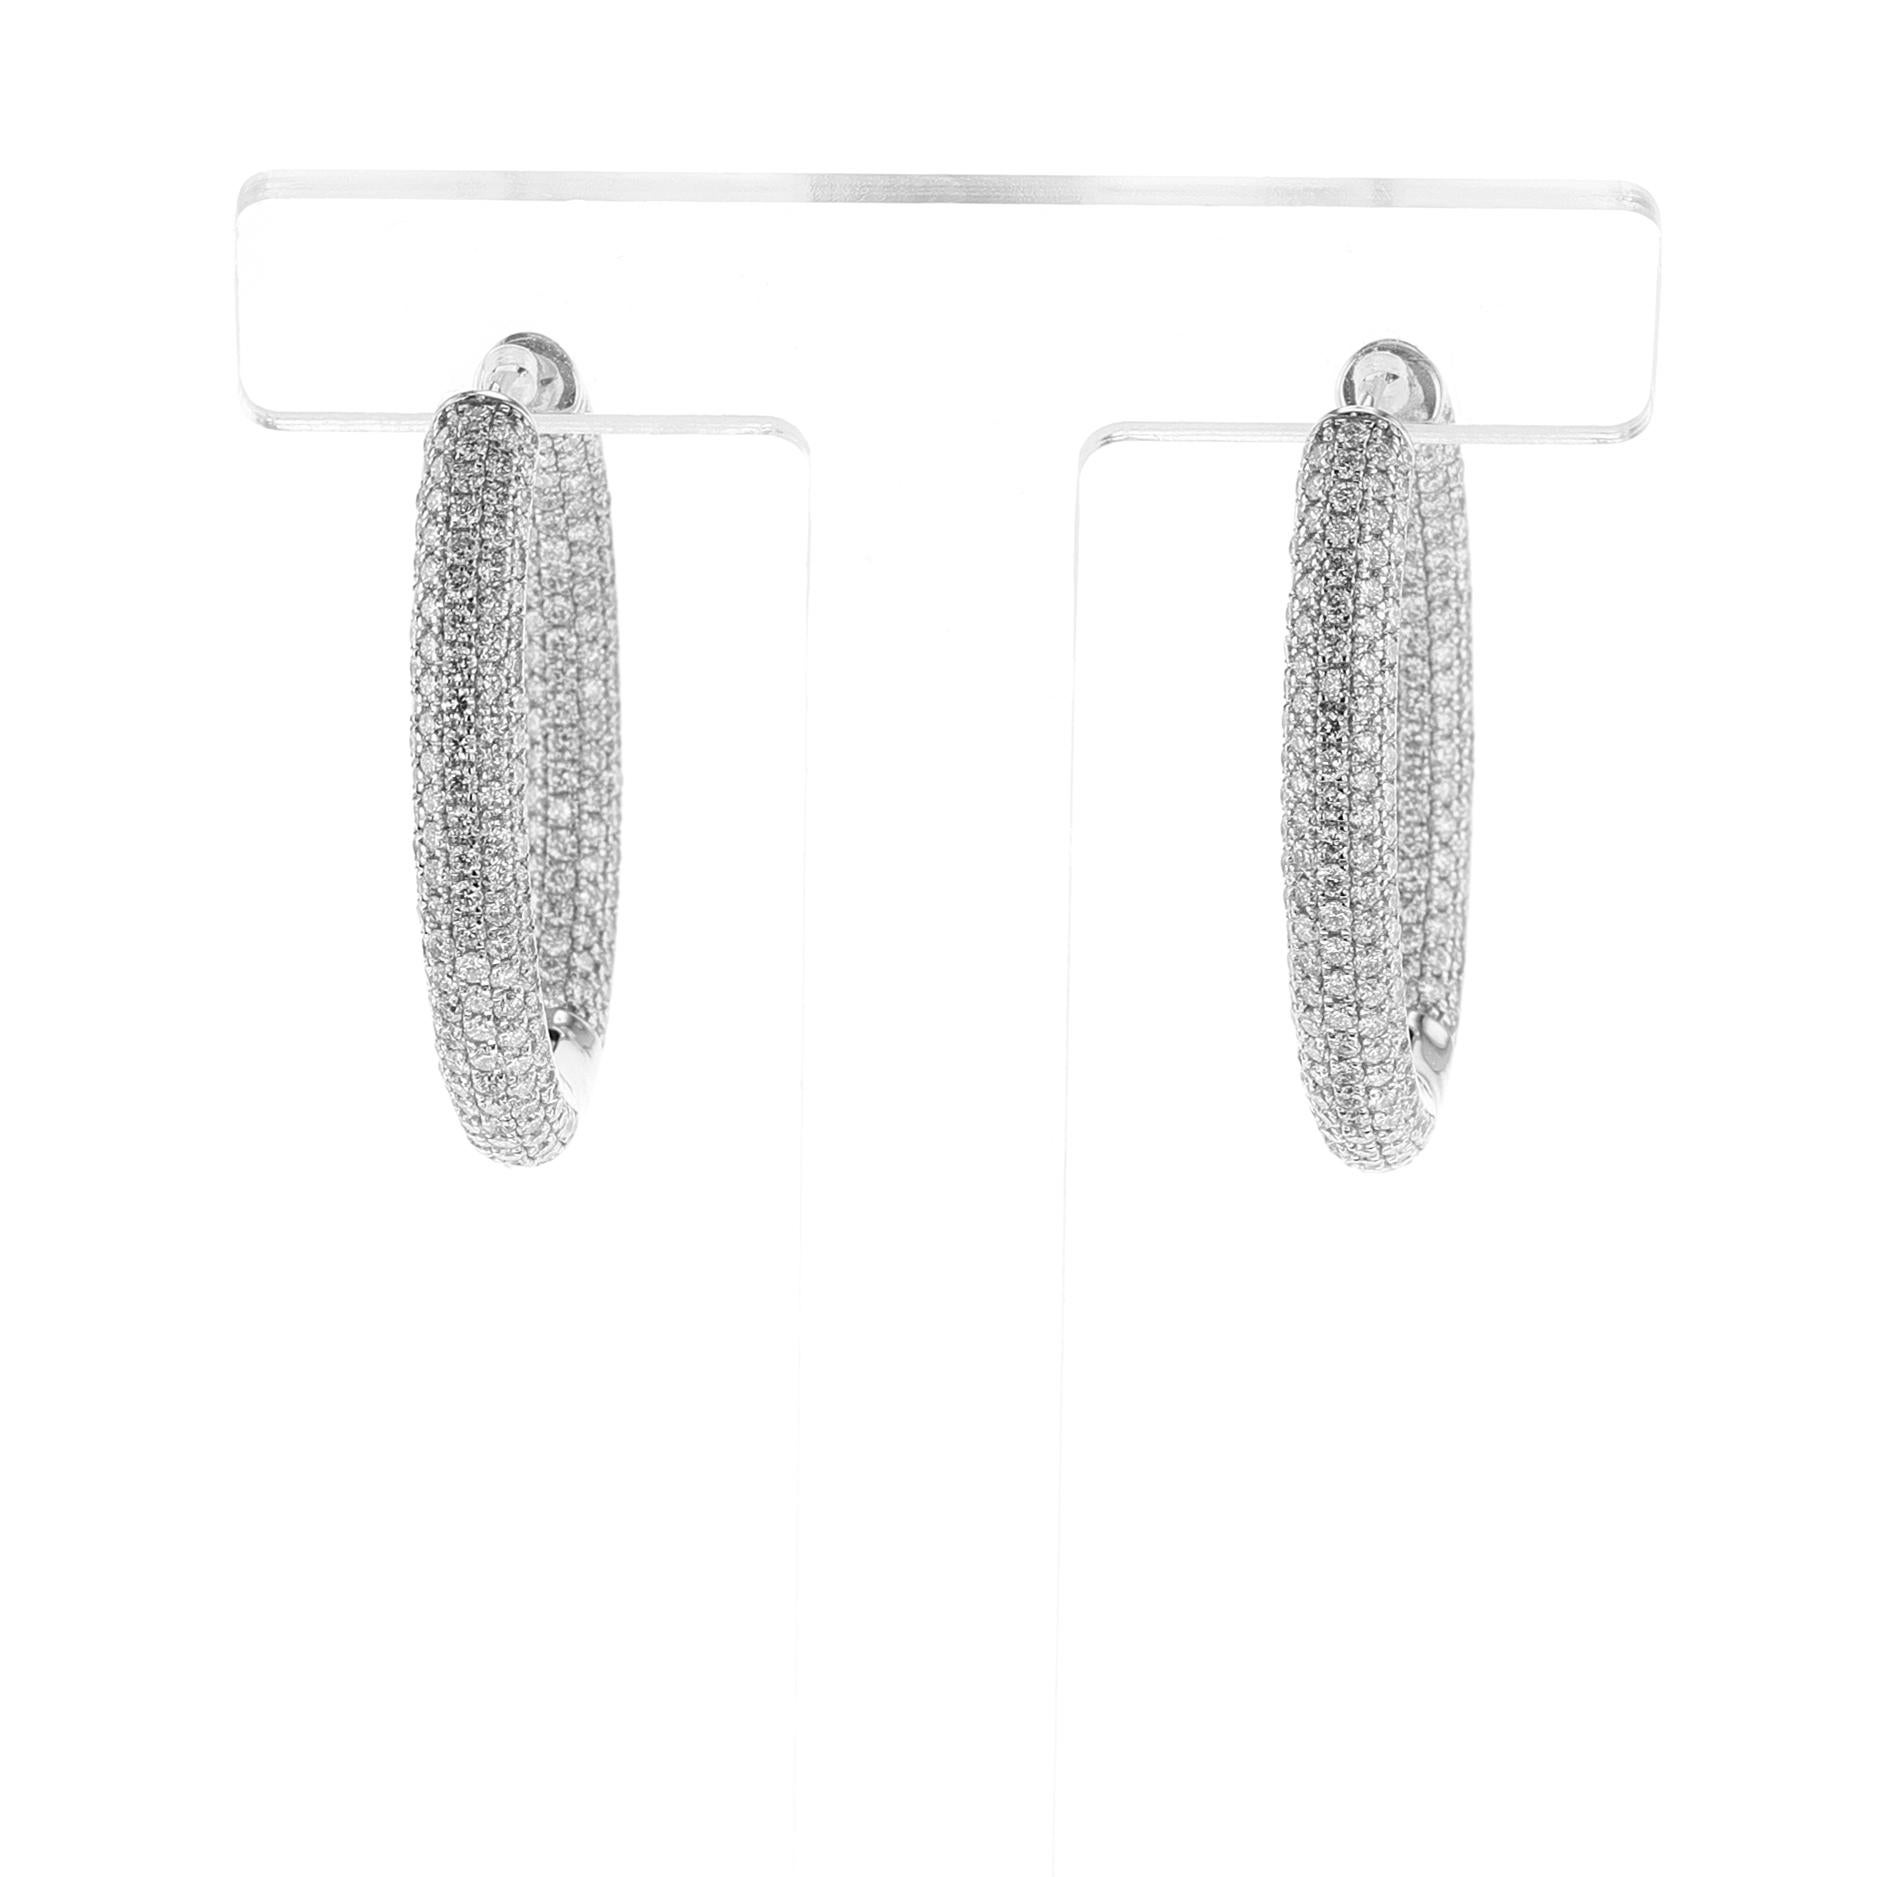 A pair of diamond hoop earrings with 5.78 cts of Diamonds. Total Weight: 17.40 grams. Length: 1.37